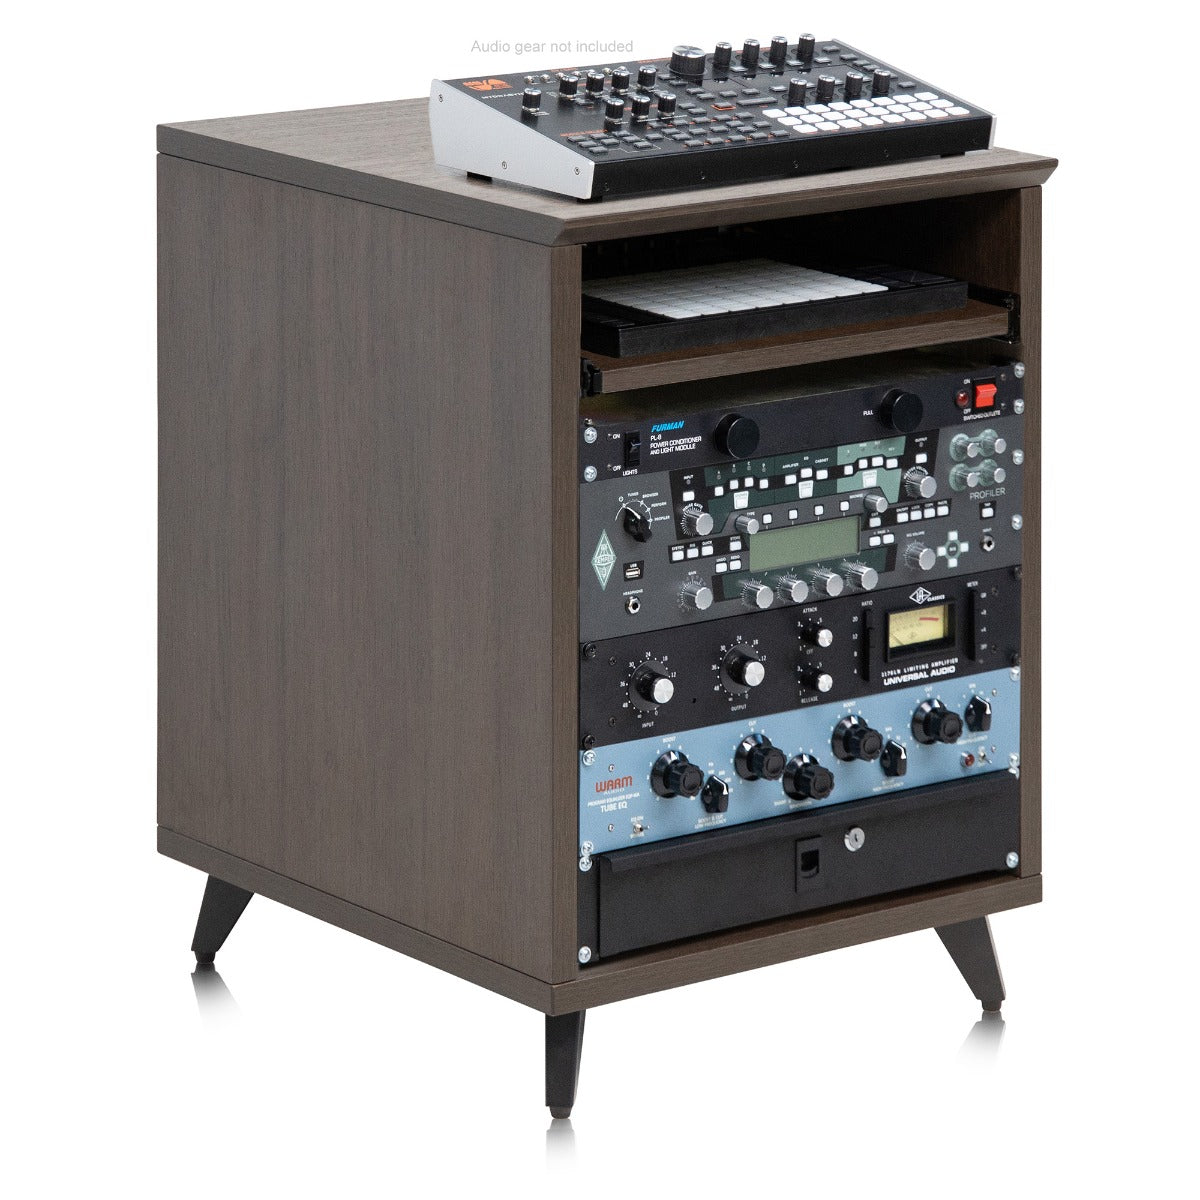 Gator Frameworks Elite Series Furniture Desk 10U Rack - Brown shown in a Right angle with audio gear installed